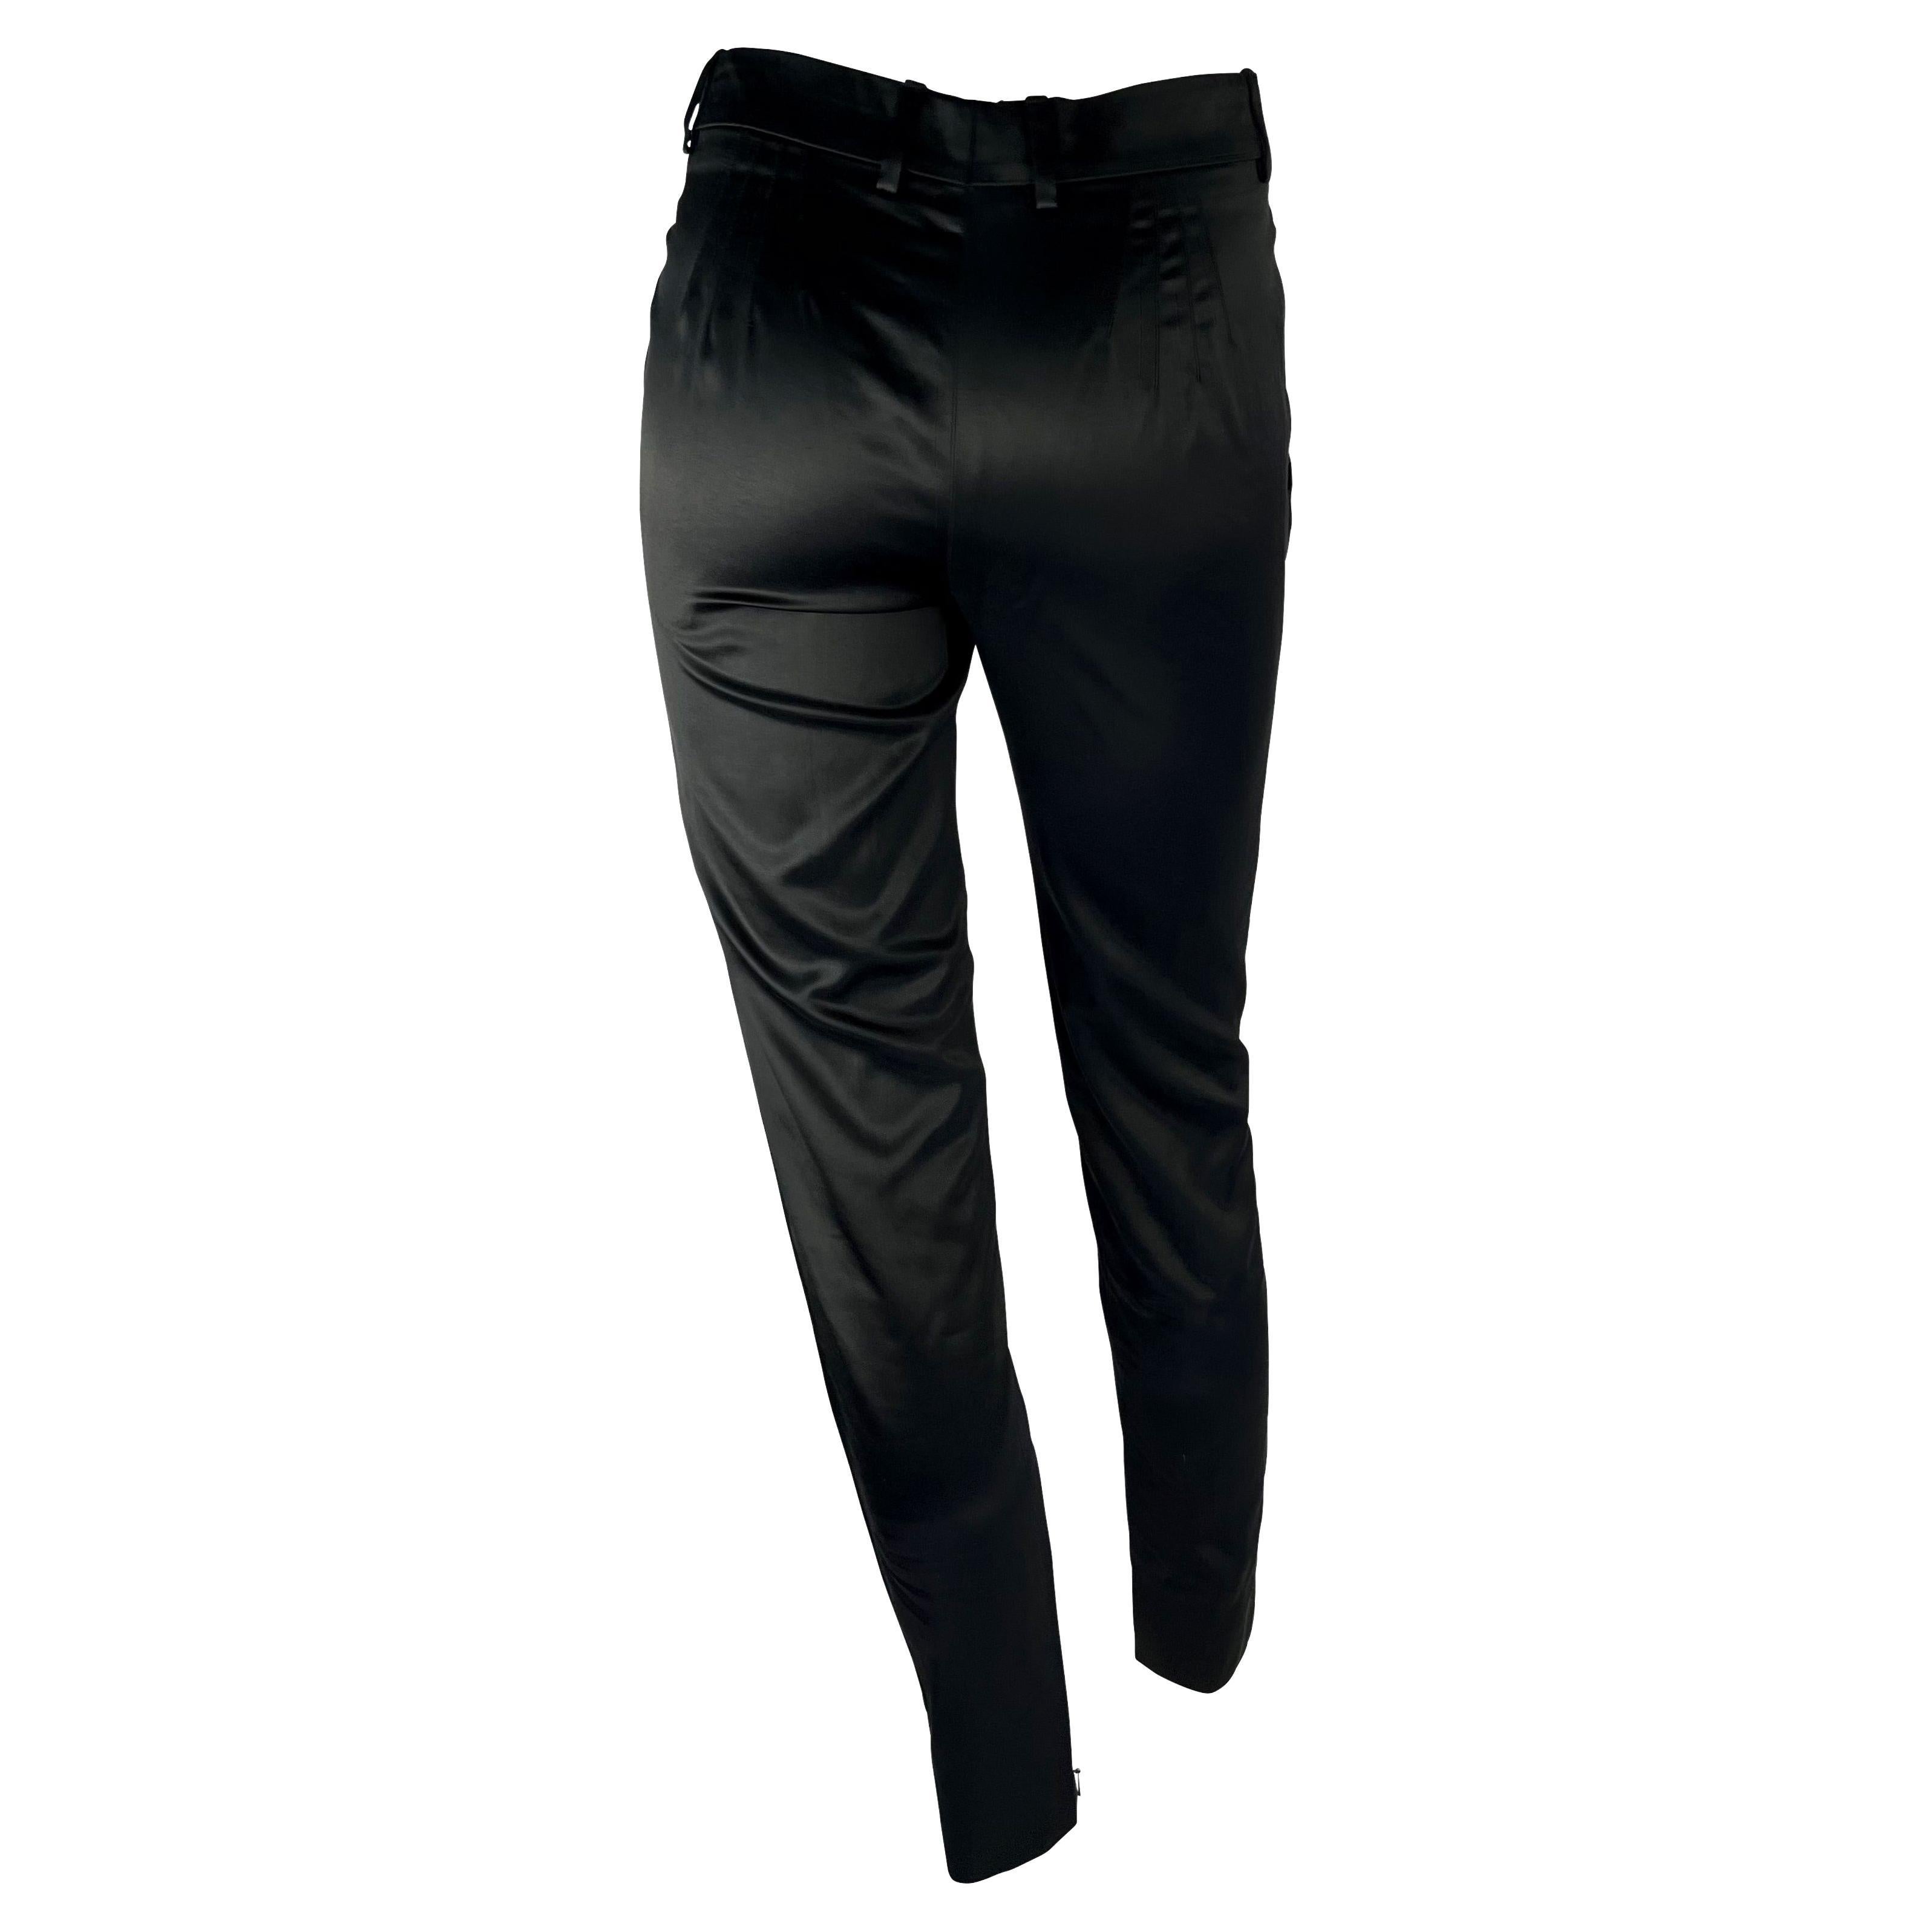 S/S 2001 Gucci by Tom Ford Black Satin Tapered Pants For Sale 3